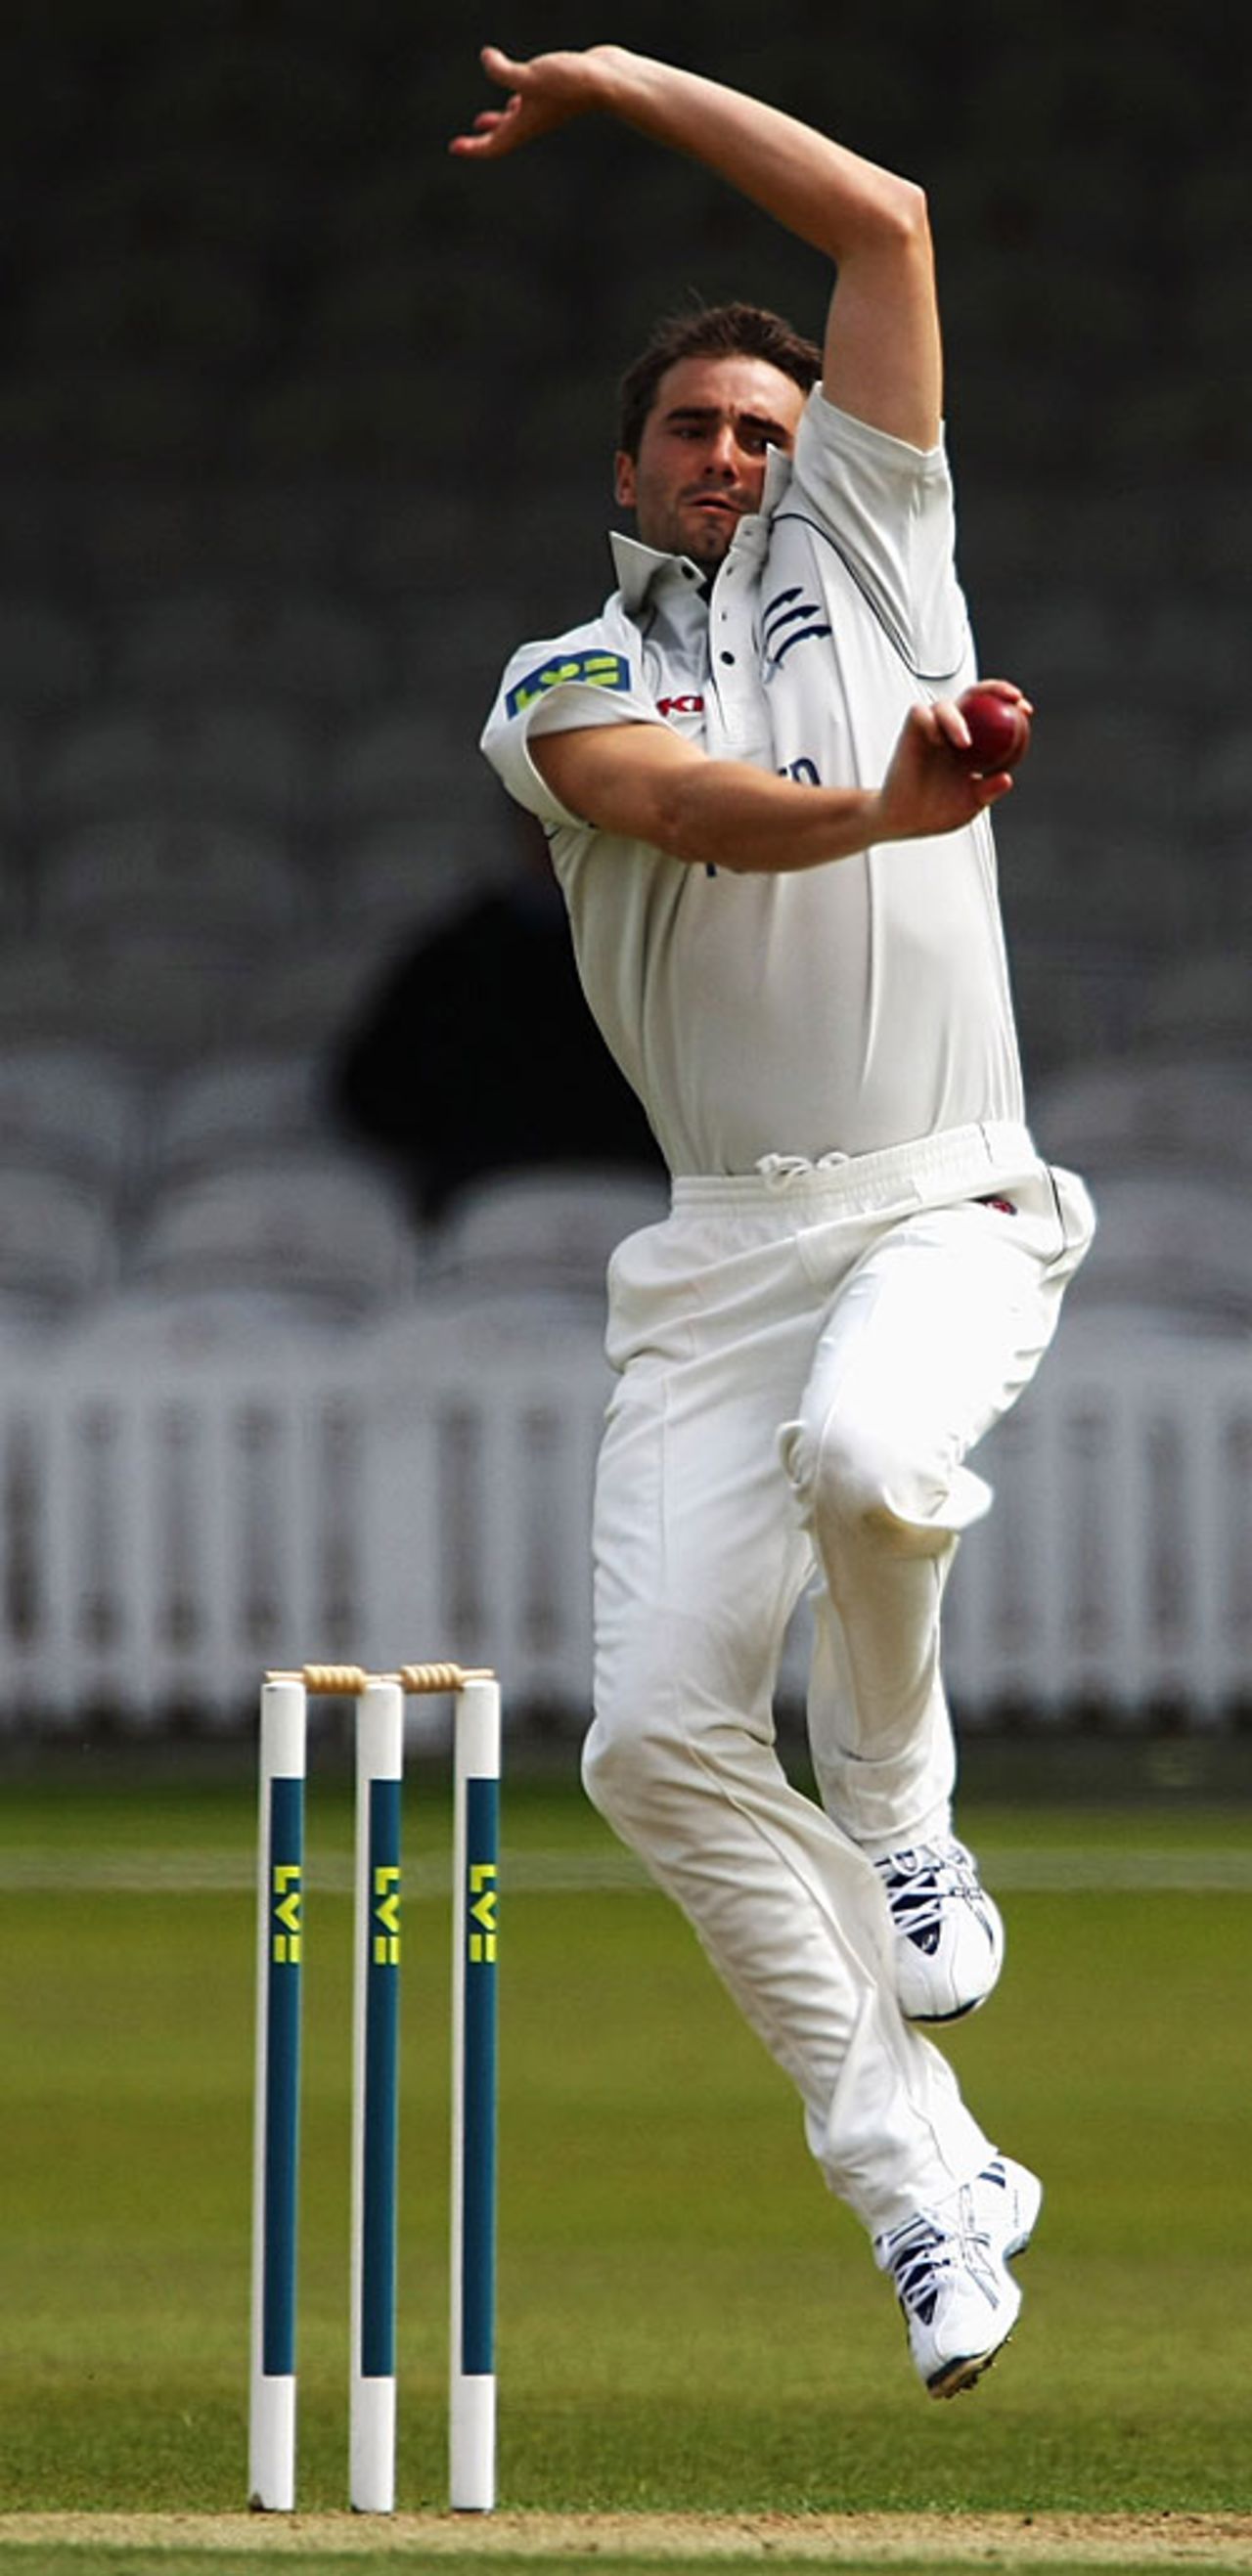 Tim Murtagh approaches his delivery stride, Middlesex v Glamorgan, County Championship, Lord's, April 25, 2008